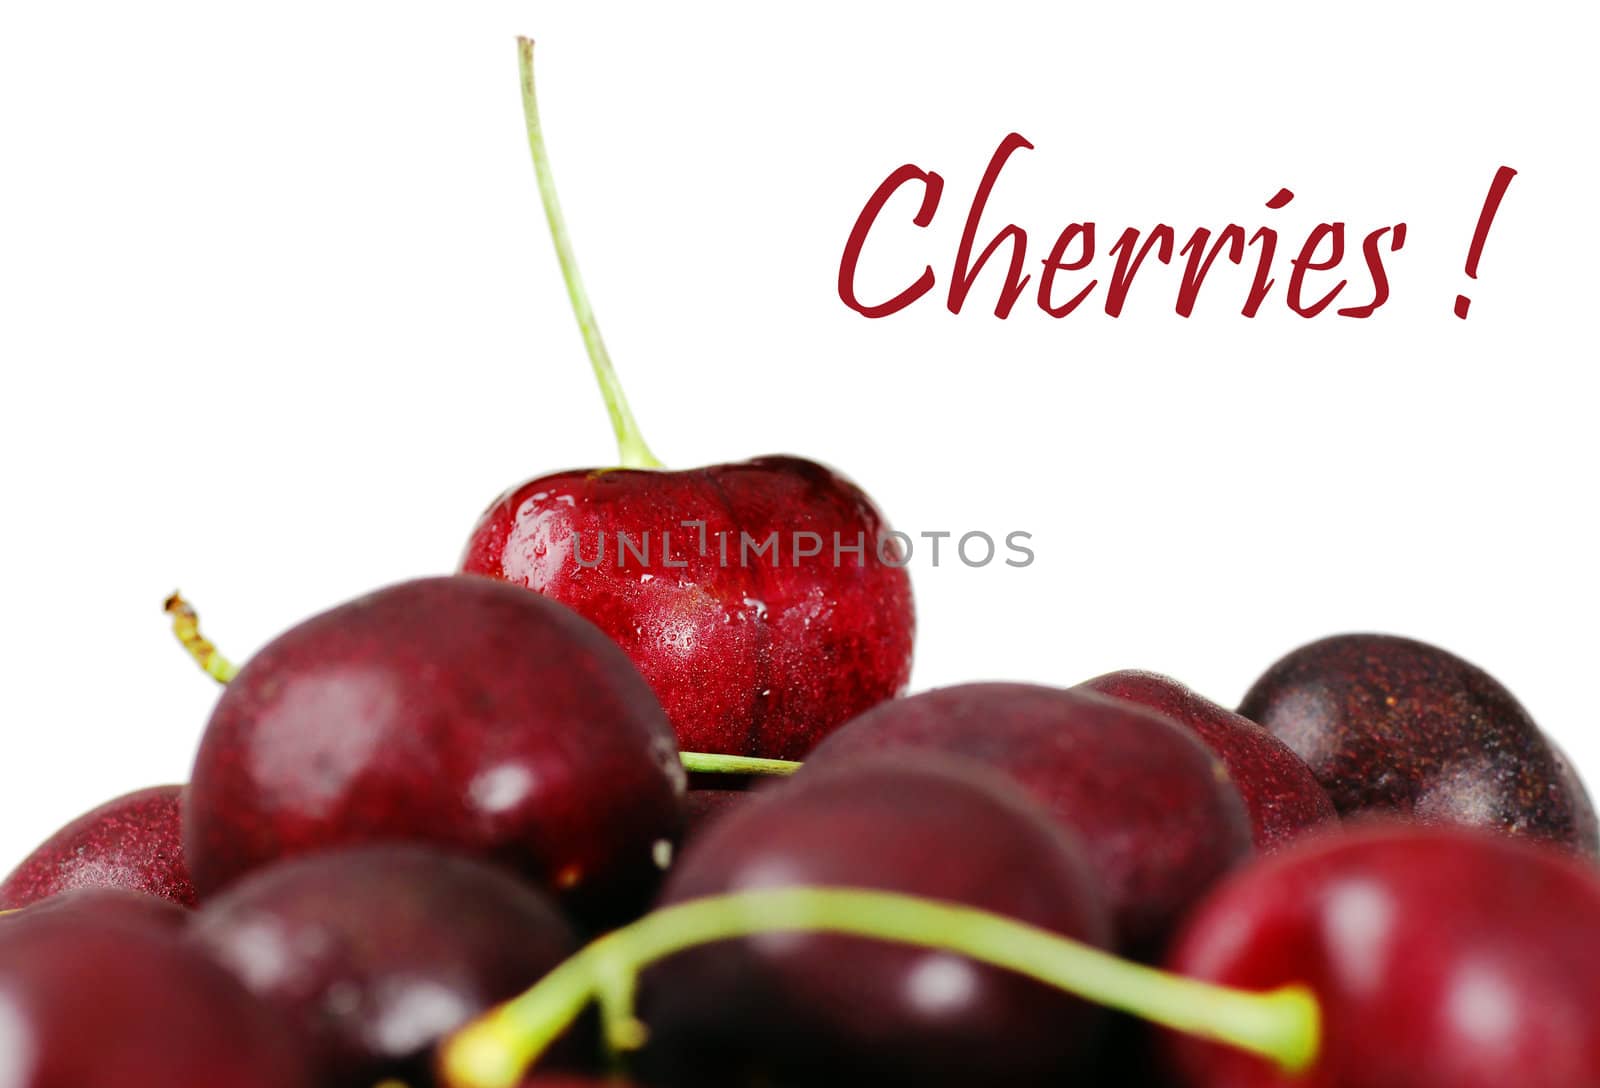 Delicious fresh red ripe and plum cherries with water condensation dropplets, focus on top cherry at the back, perfect nutrition background.